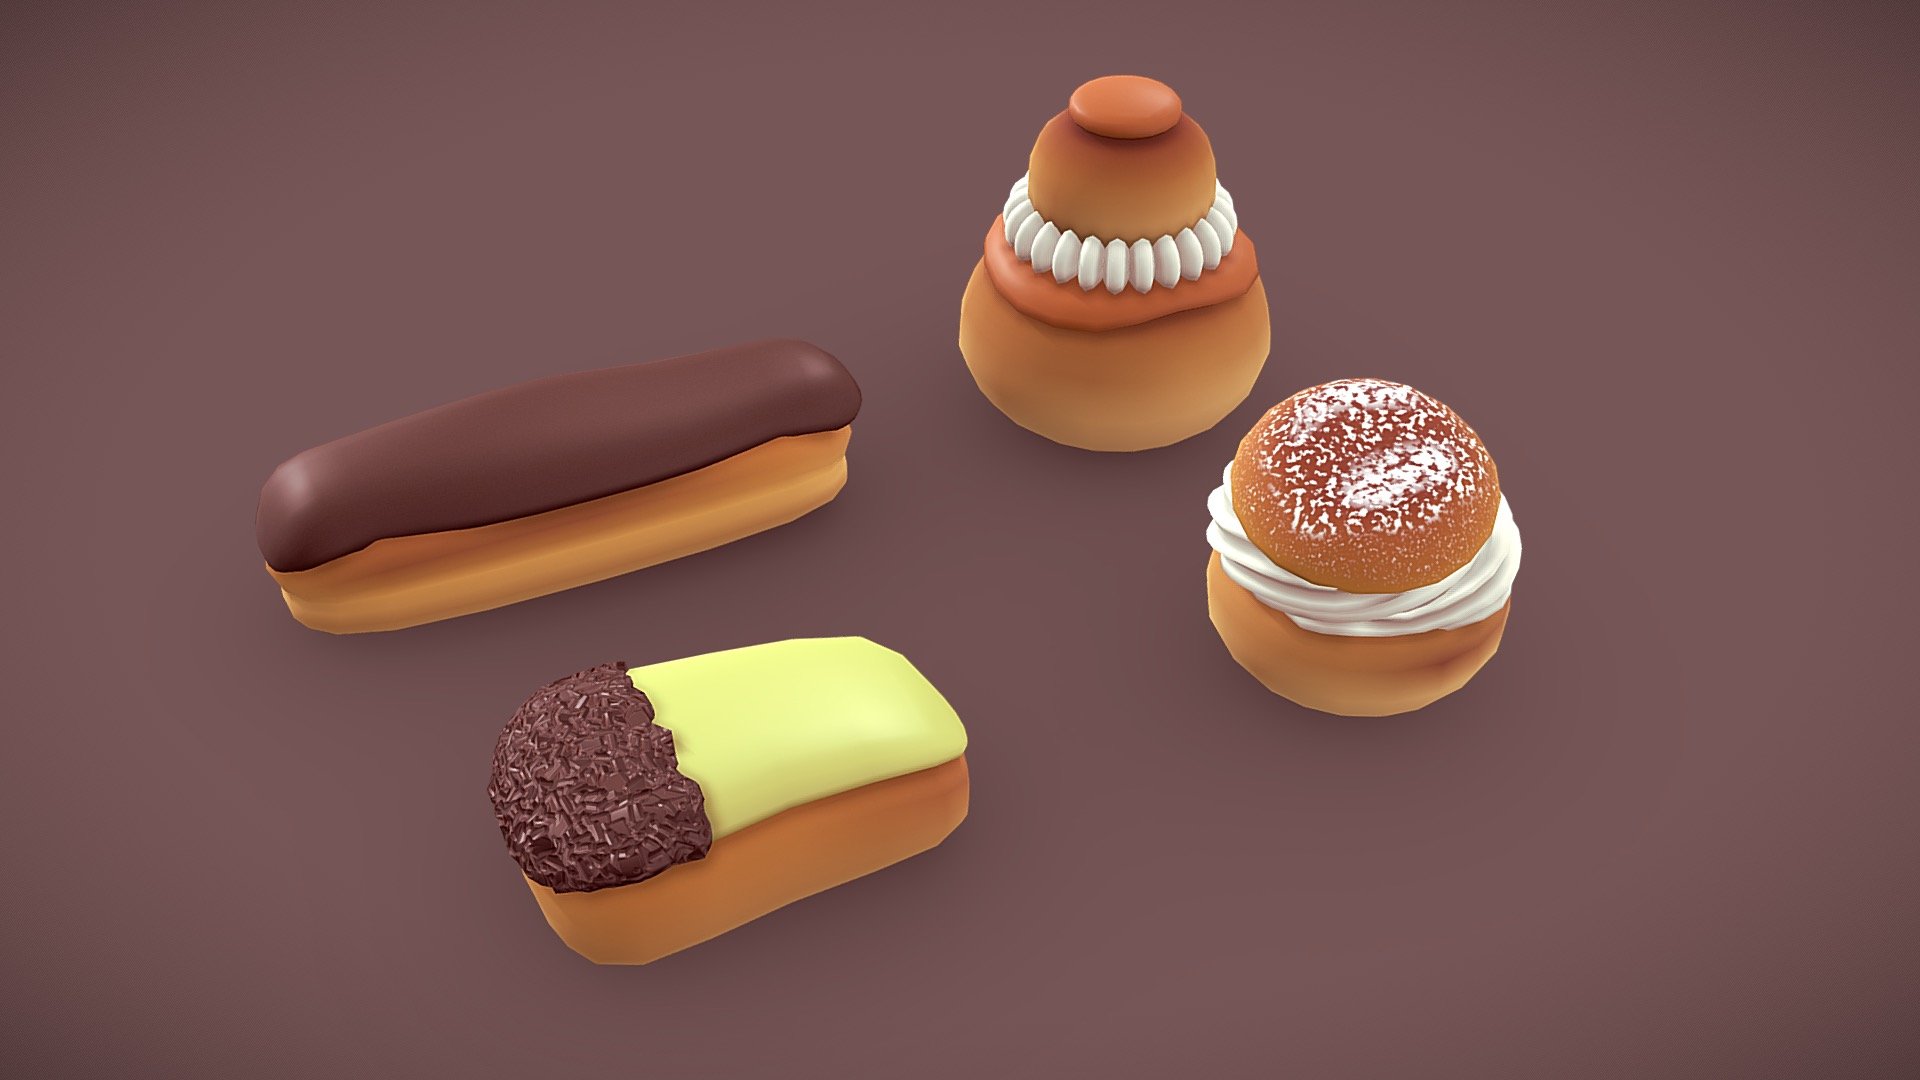 French Pastry Stylized lowpoly ready for subdiv.

Gland, Eclair au chocolat, Chou, Religieuse.

1024x1024 texture. Diffuse/Roughness/Specular 3d model